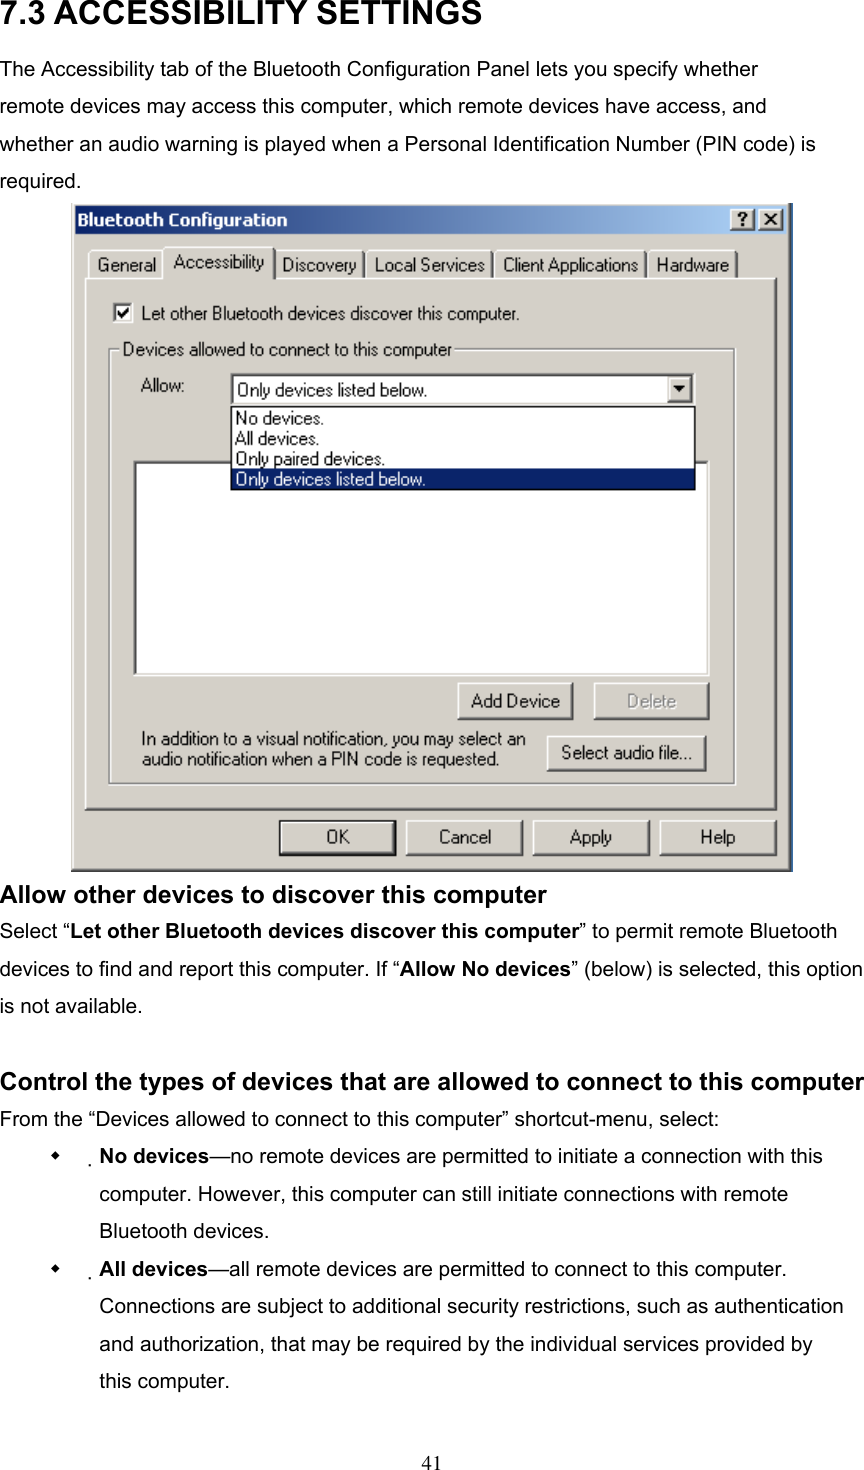 7.3 ACCESSIBILITY SETTINGS The Accessibility tab of the Bluetooth Configuration Panel lets you specify whether remote devices may access this computer, which remote devices have access, and whether an audio warning is played when a Personal Identification Number (PIN code) is required.  Allow other devices to discover this computer Select “Let other Bluetooth devices discover this computer” to permit remote Bluetooth devices to find and report this computer. If “Allow No devices” (below) is selected, this option is not available.  Control the types of devices that are allowed to connect to this computer From the “Devices allowed to connect to this computer” shortcut-menu, select:   No devices—no remote devices are permitted to initiate a connection with this computer. However, this computer can still initiate connections with remote Bluetooth devices.   All devices—all remote devices are permitted to connect to this computer. Connections are subject to additional security restrictions, such as authentication and authorization, that may be required by the individual services provided by this computer.  41 